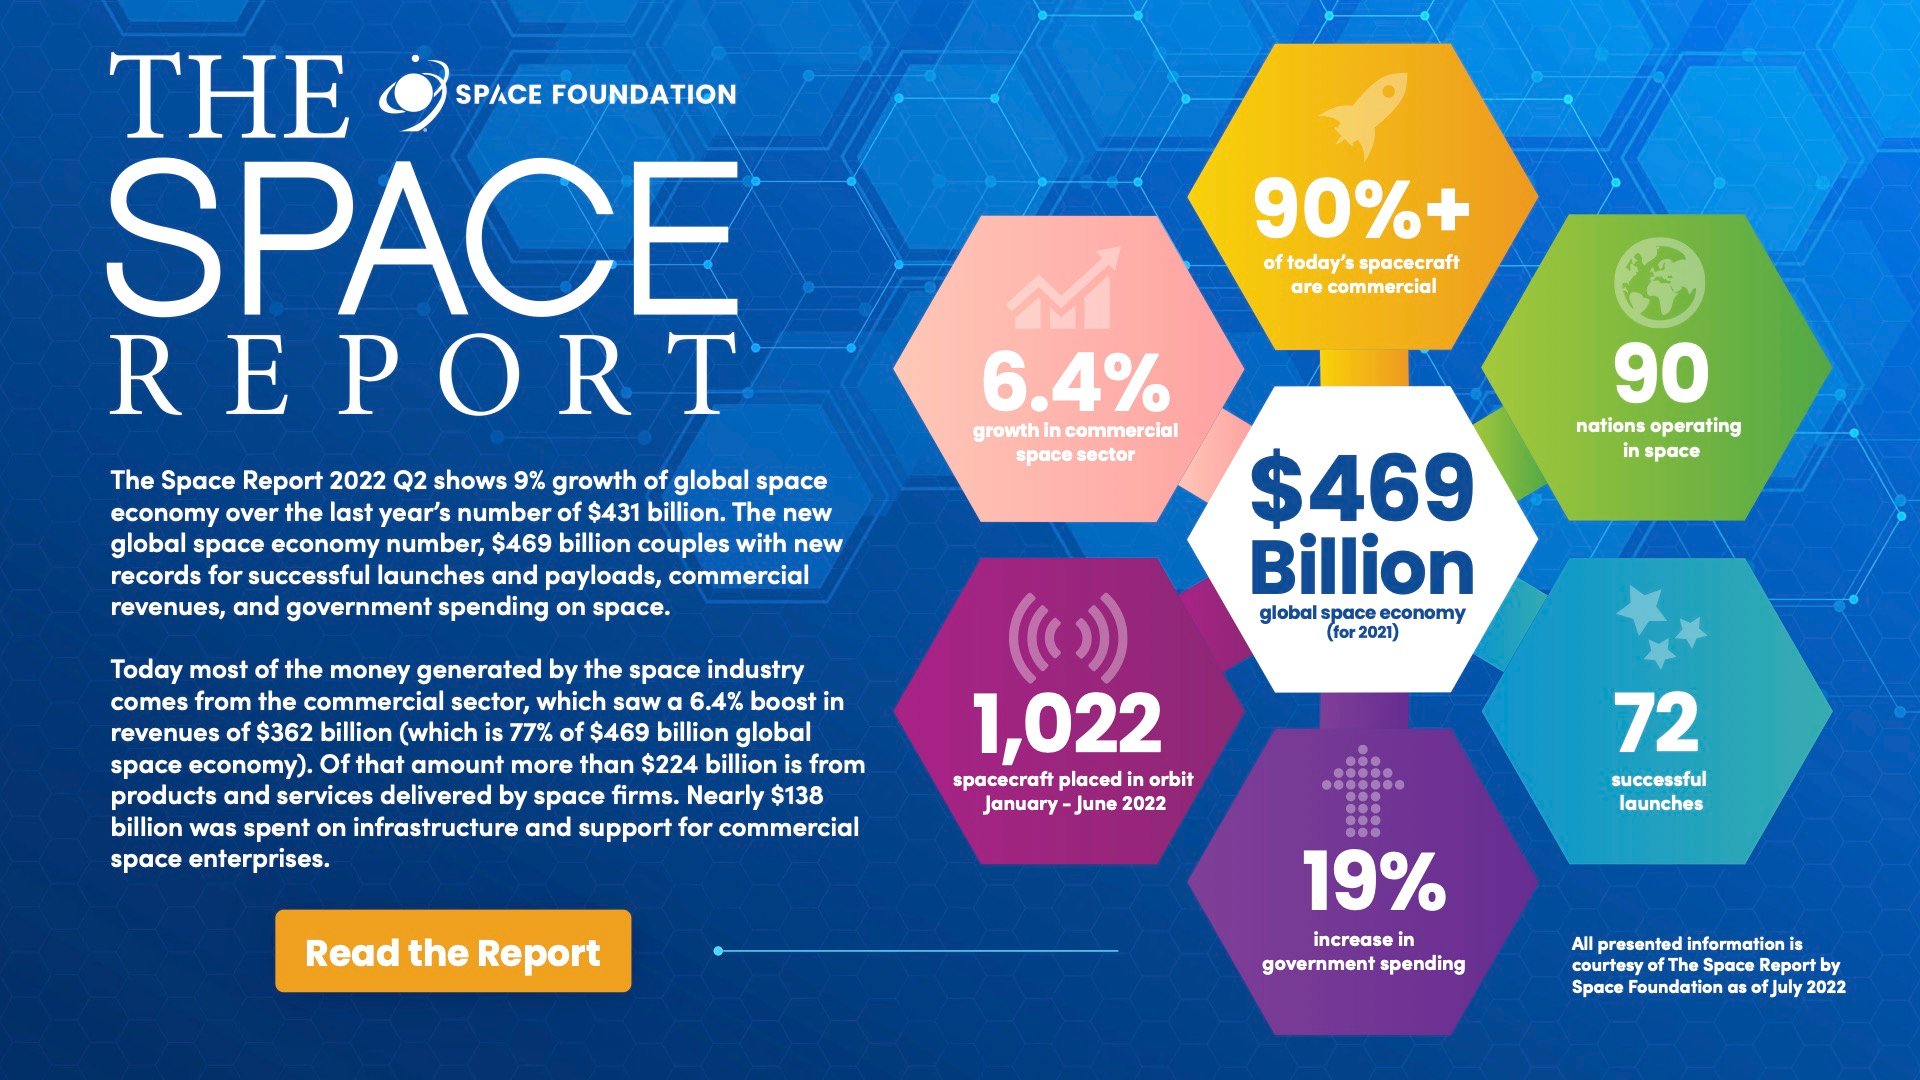 Space Foundation Releases The Space Report 2022 Q2 Showing Growth of Global Space Economy